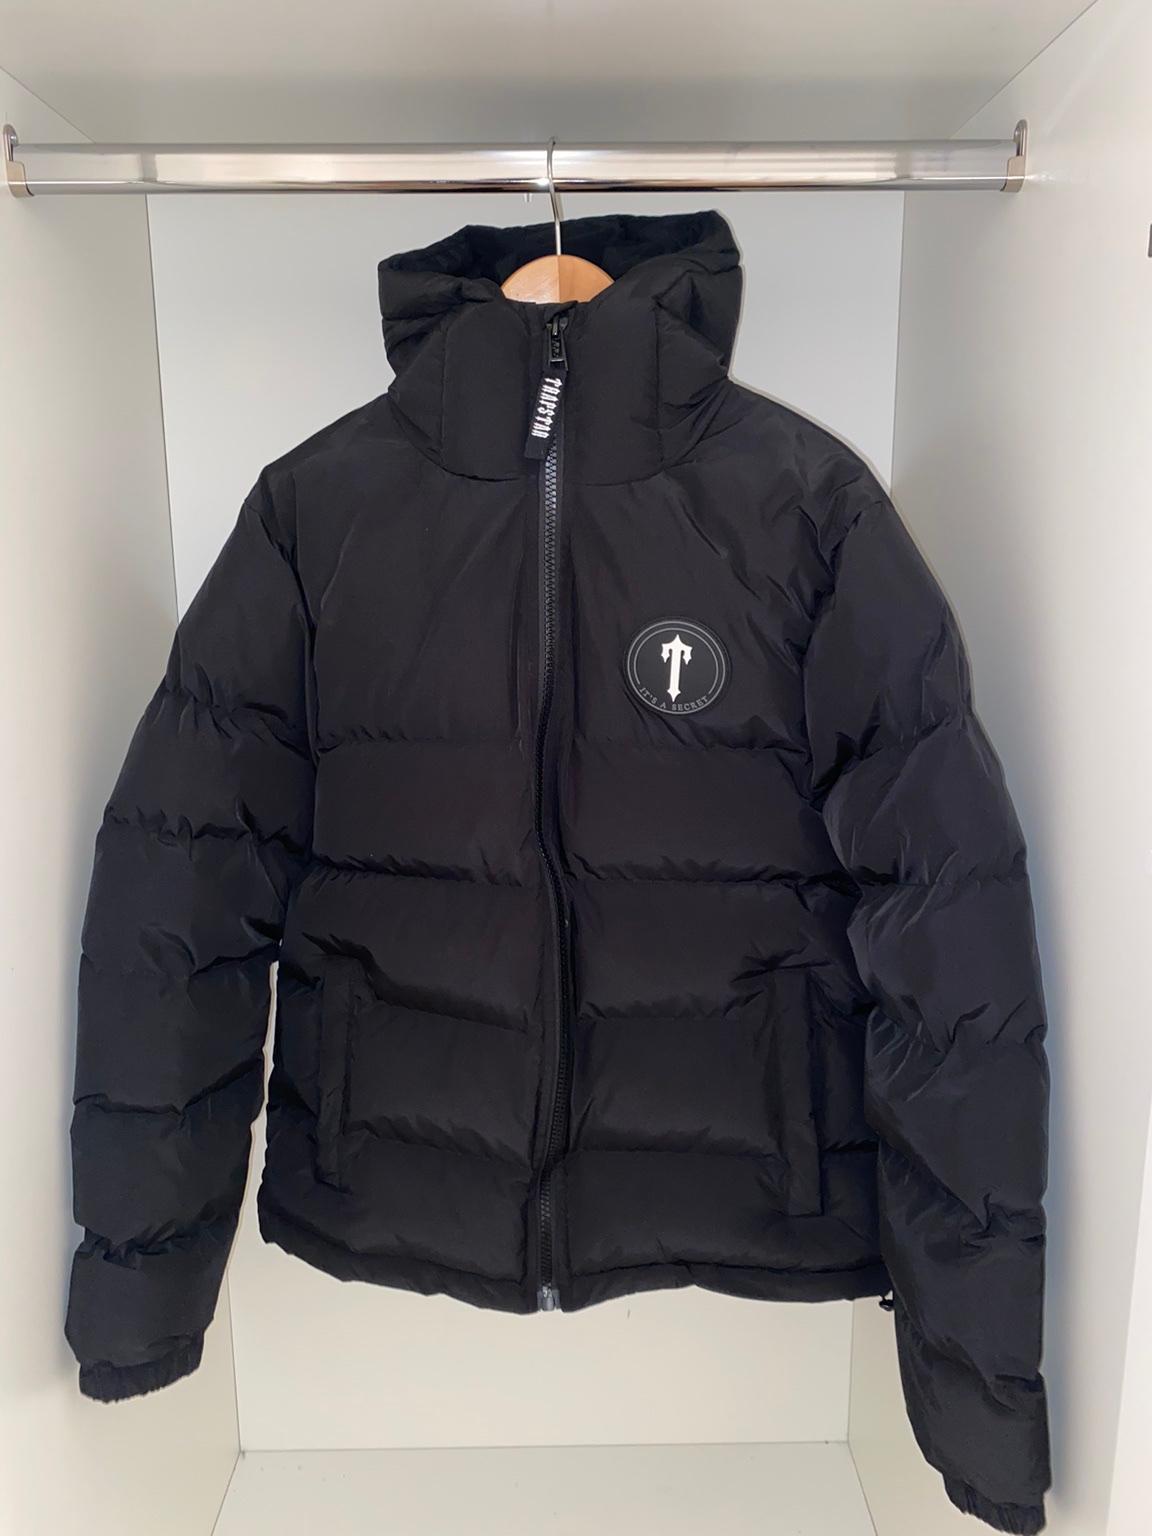 Trapstar Jacket in NW1 London for £255.00 for sale | Shpock